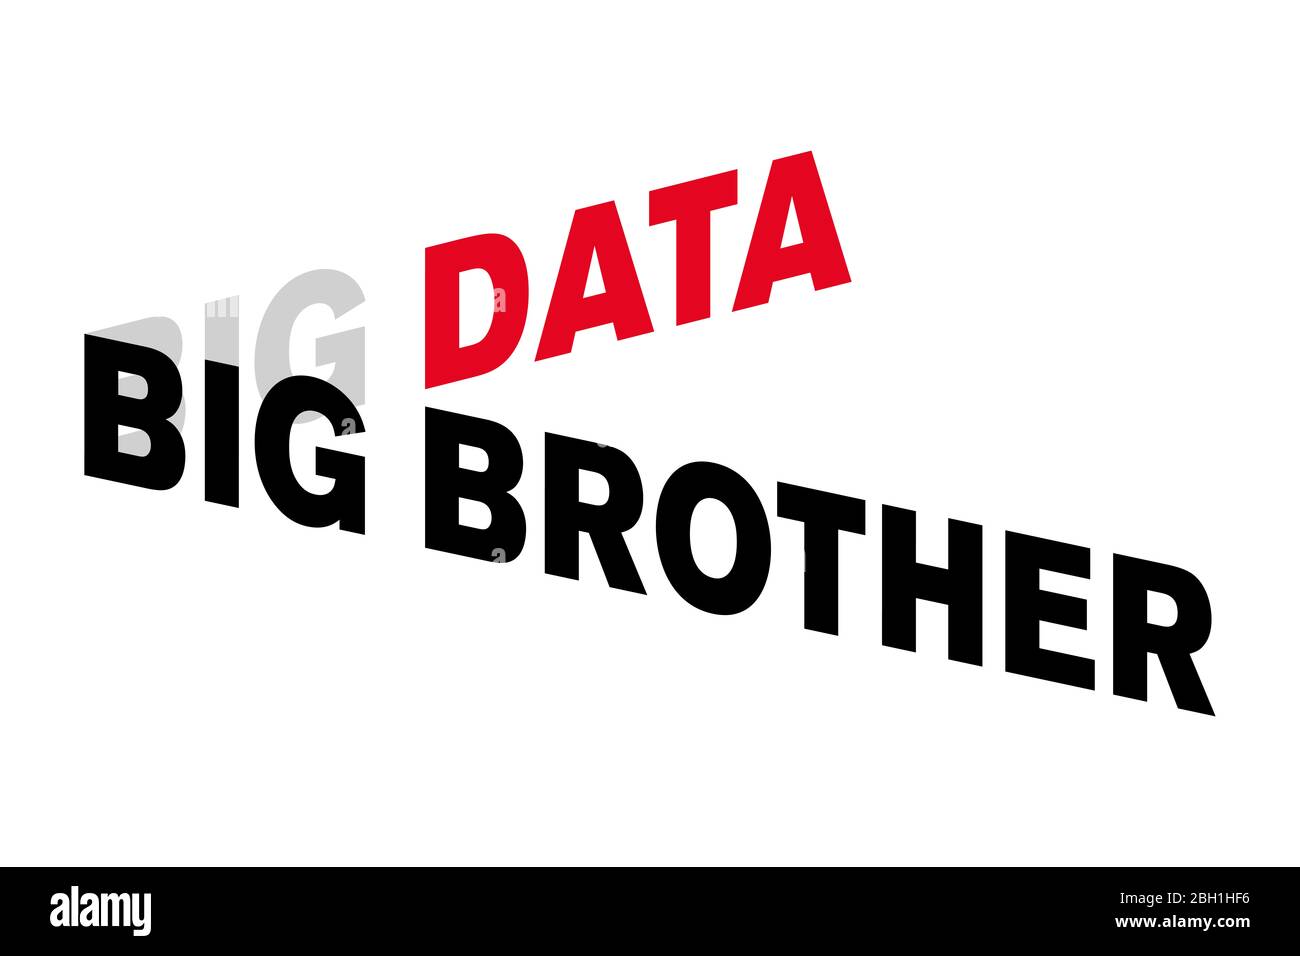 Big Data Big Brother lettering. Words shown in capital letters, distorted and offset, with a three-dimensional effect. Red, gray and black letters. Stock Photo